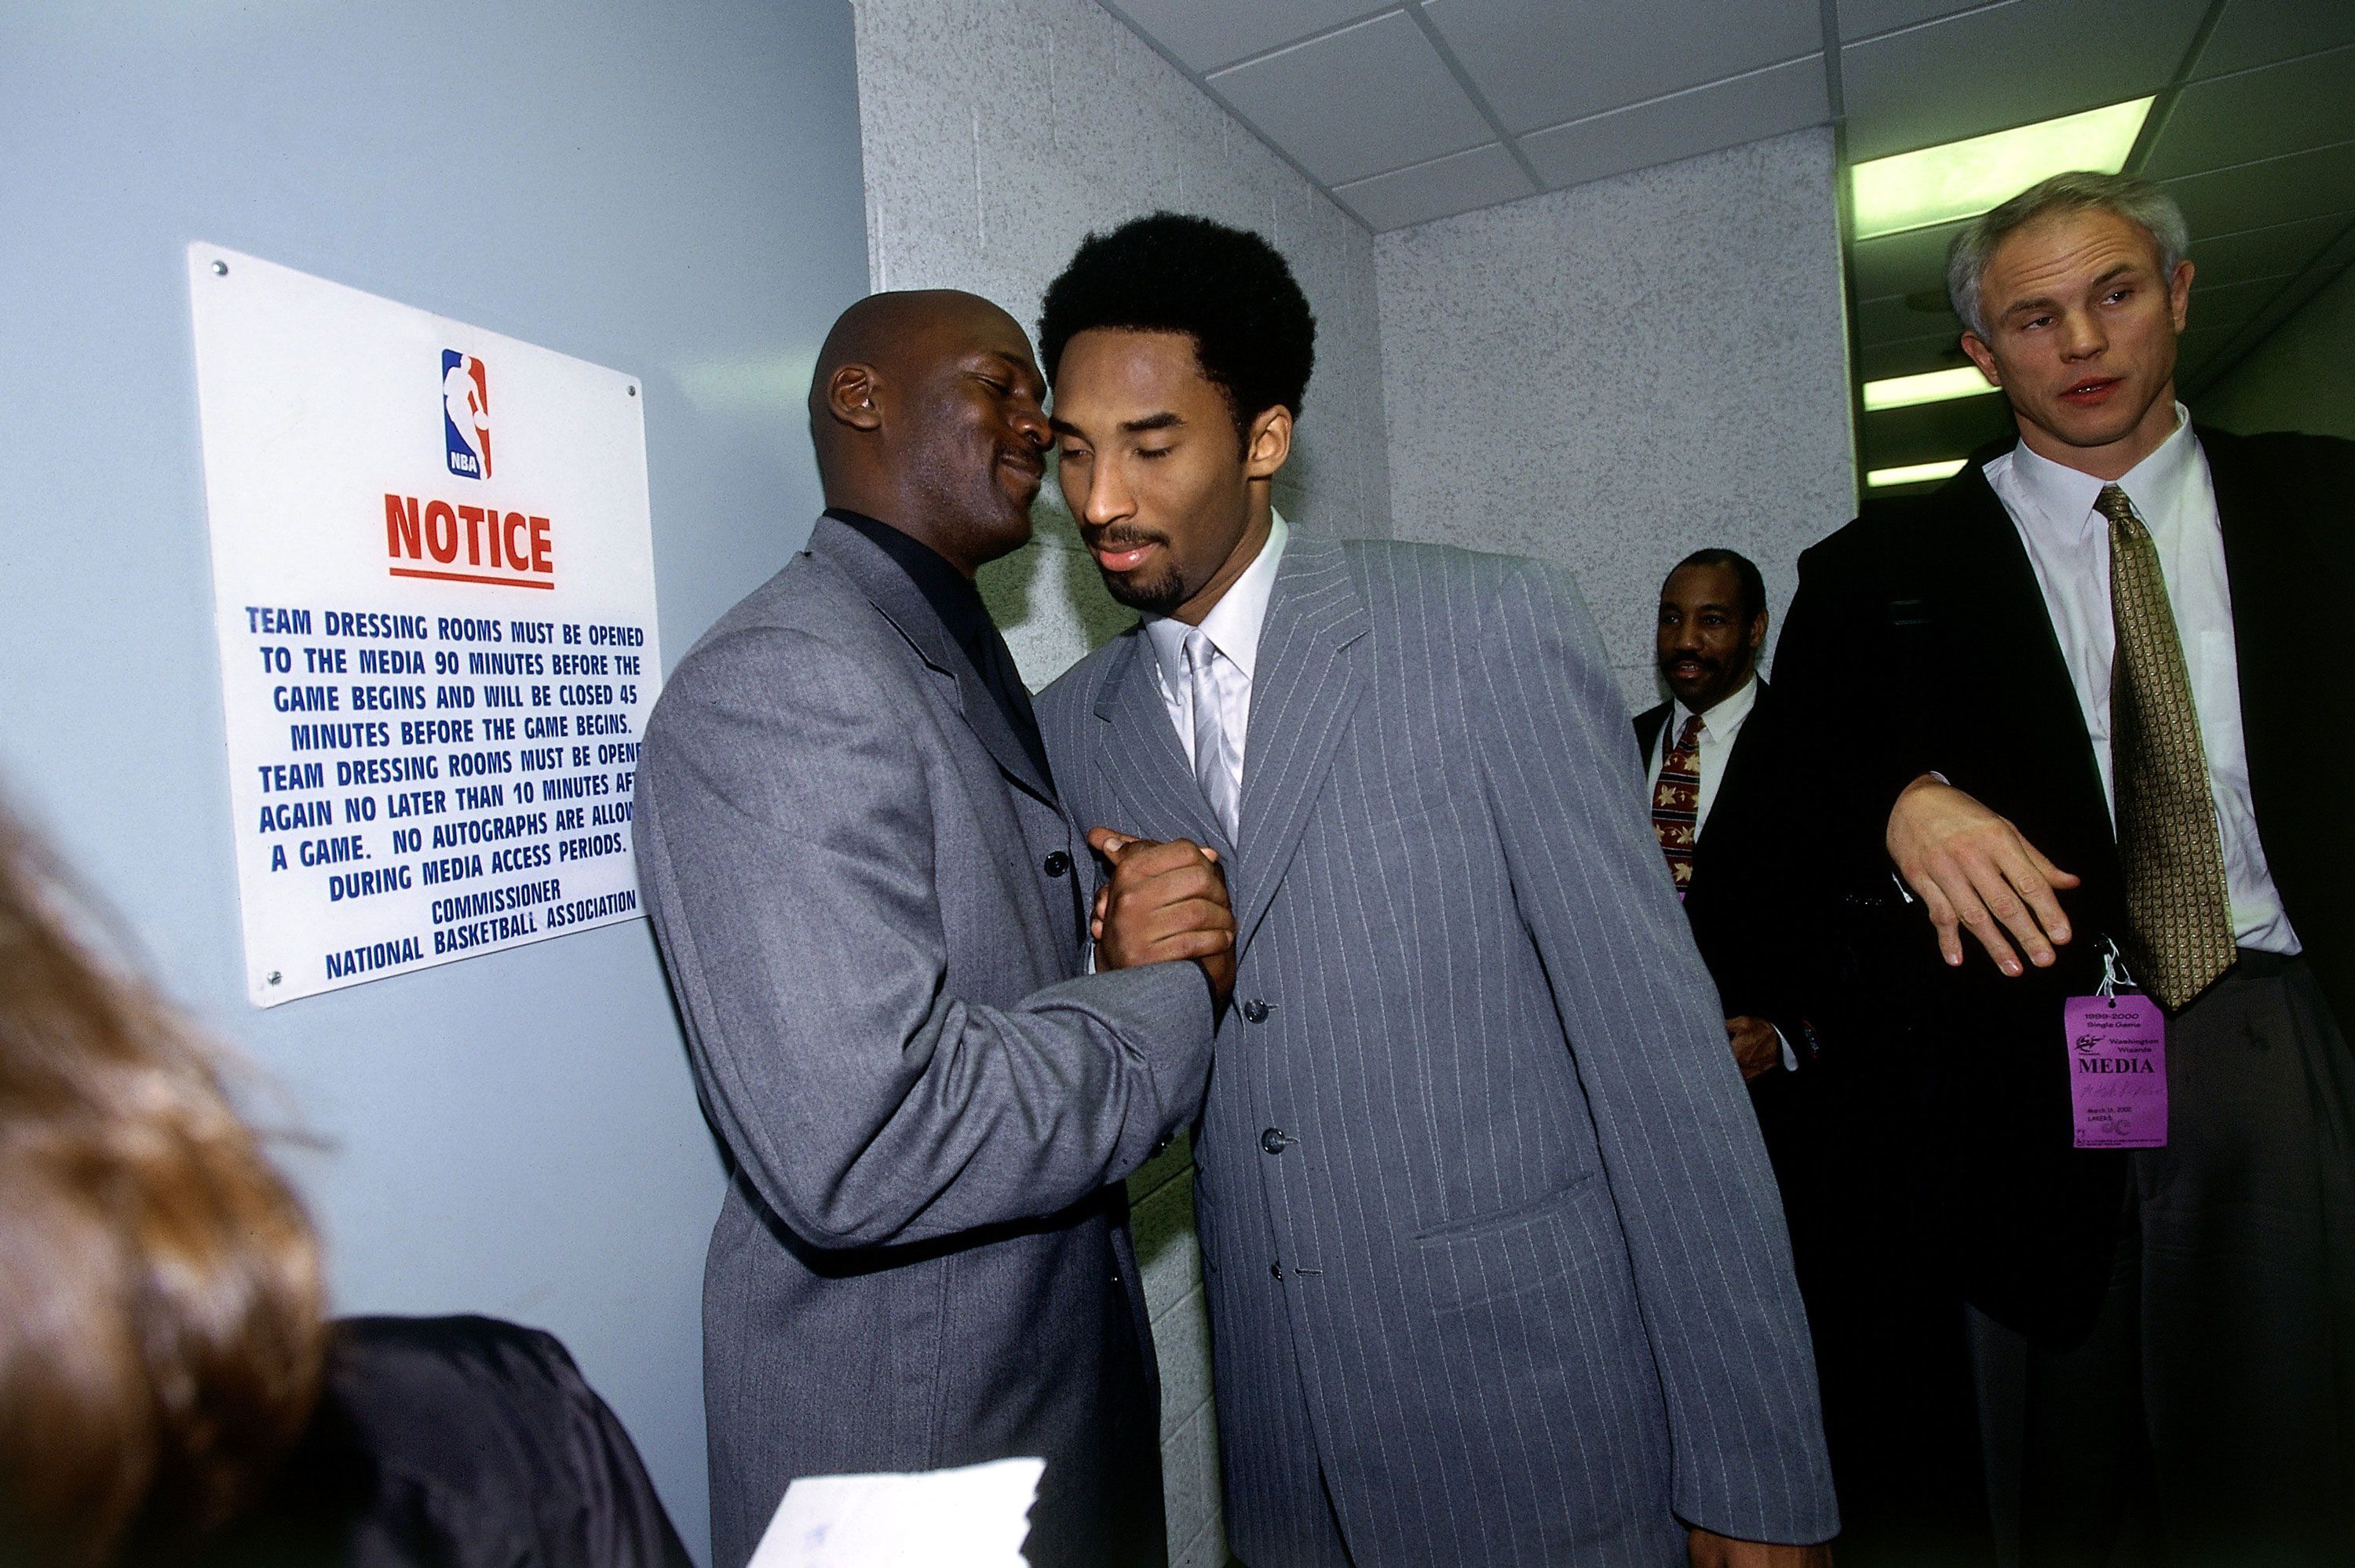 Michael Jordan to present Kobe Bryant at Hall of Fame induction ceremony 